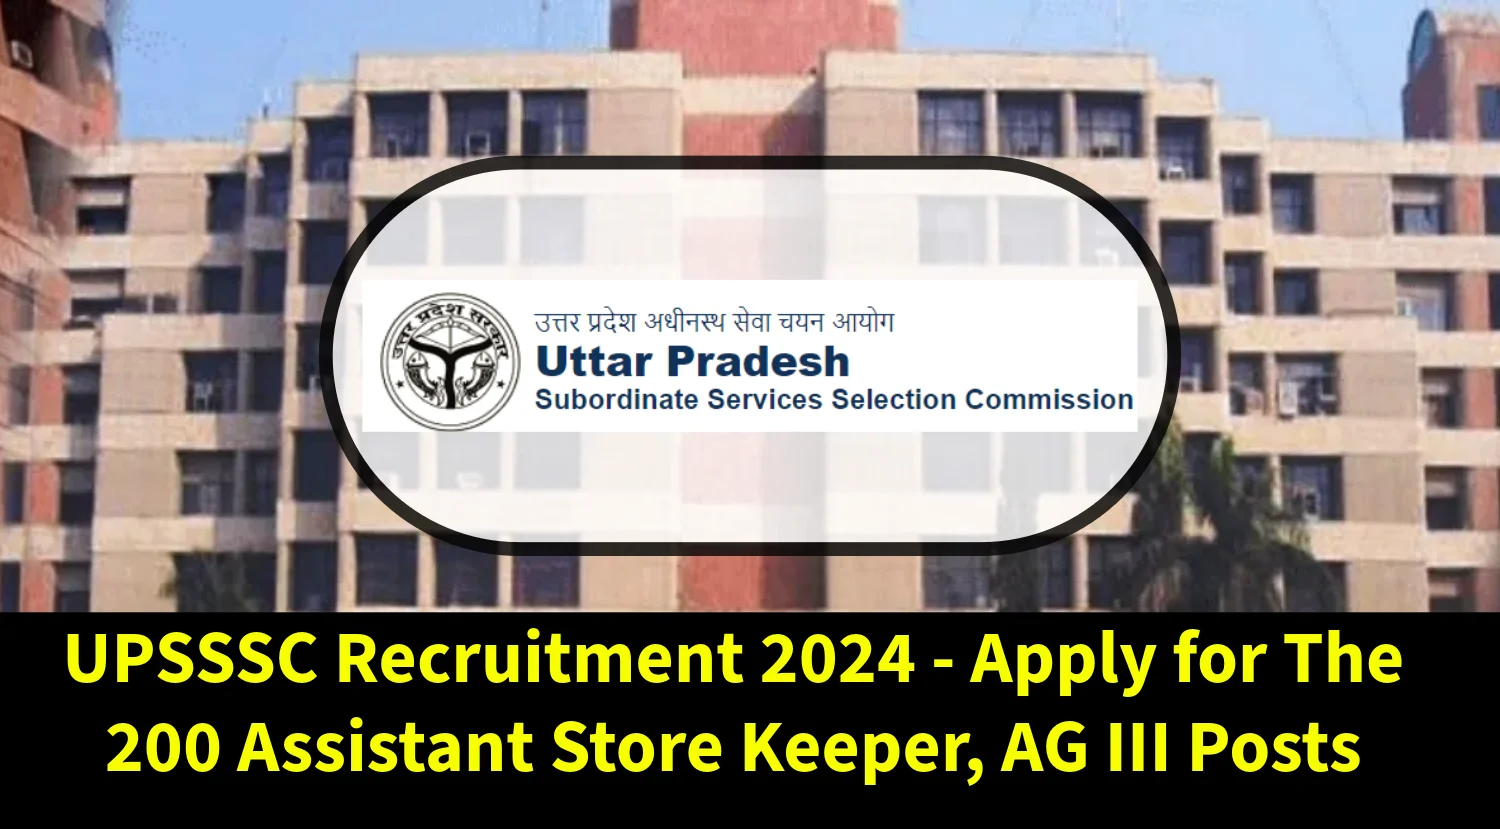 UPSSSC Recruitment 2024 - Apply for The 200 Assistant Store Keeper, AG III Posts